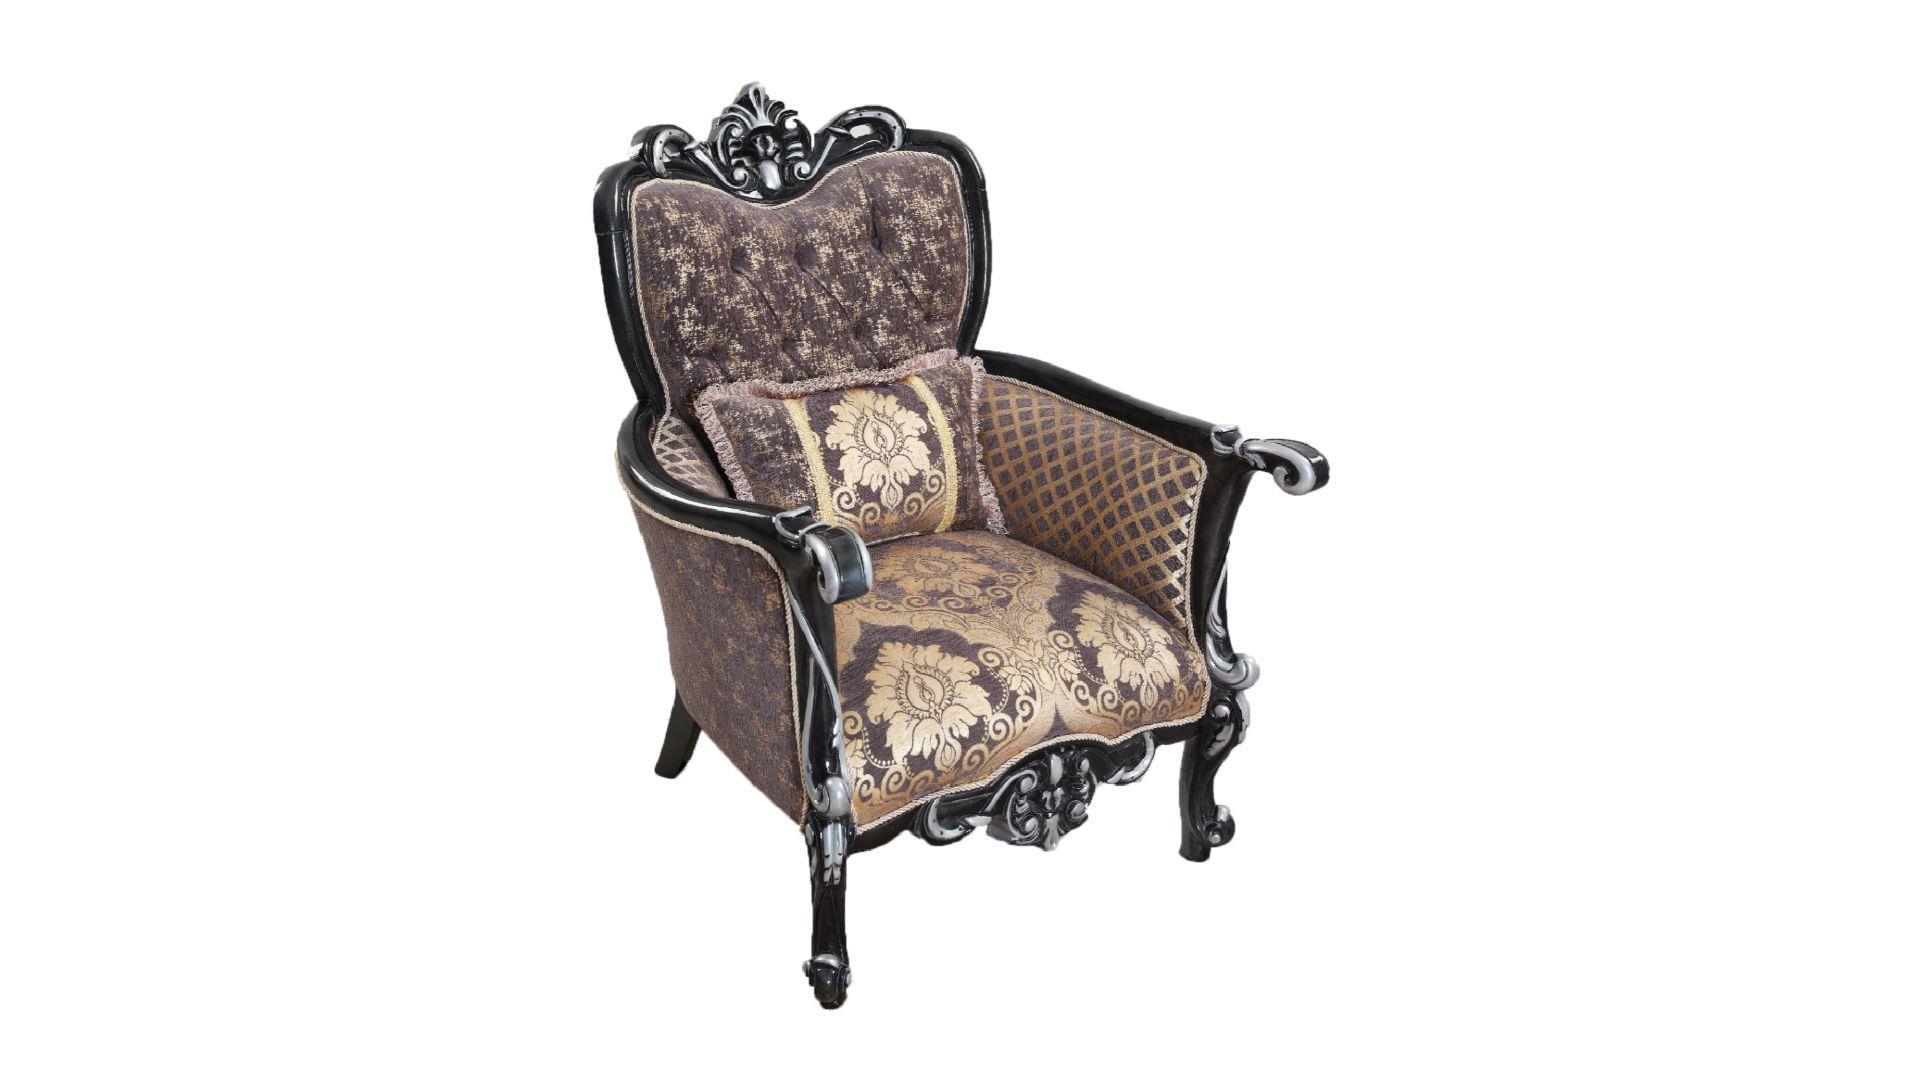 Classic, Traditional Arm Chair FLORENCE FLORENCE-CH in Charcoal, Gray Chenille